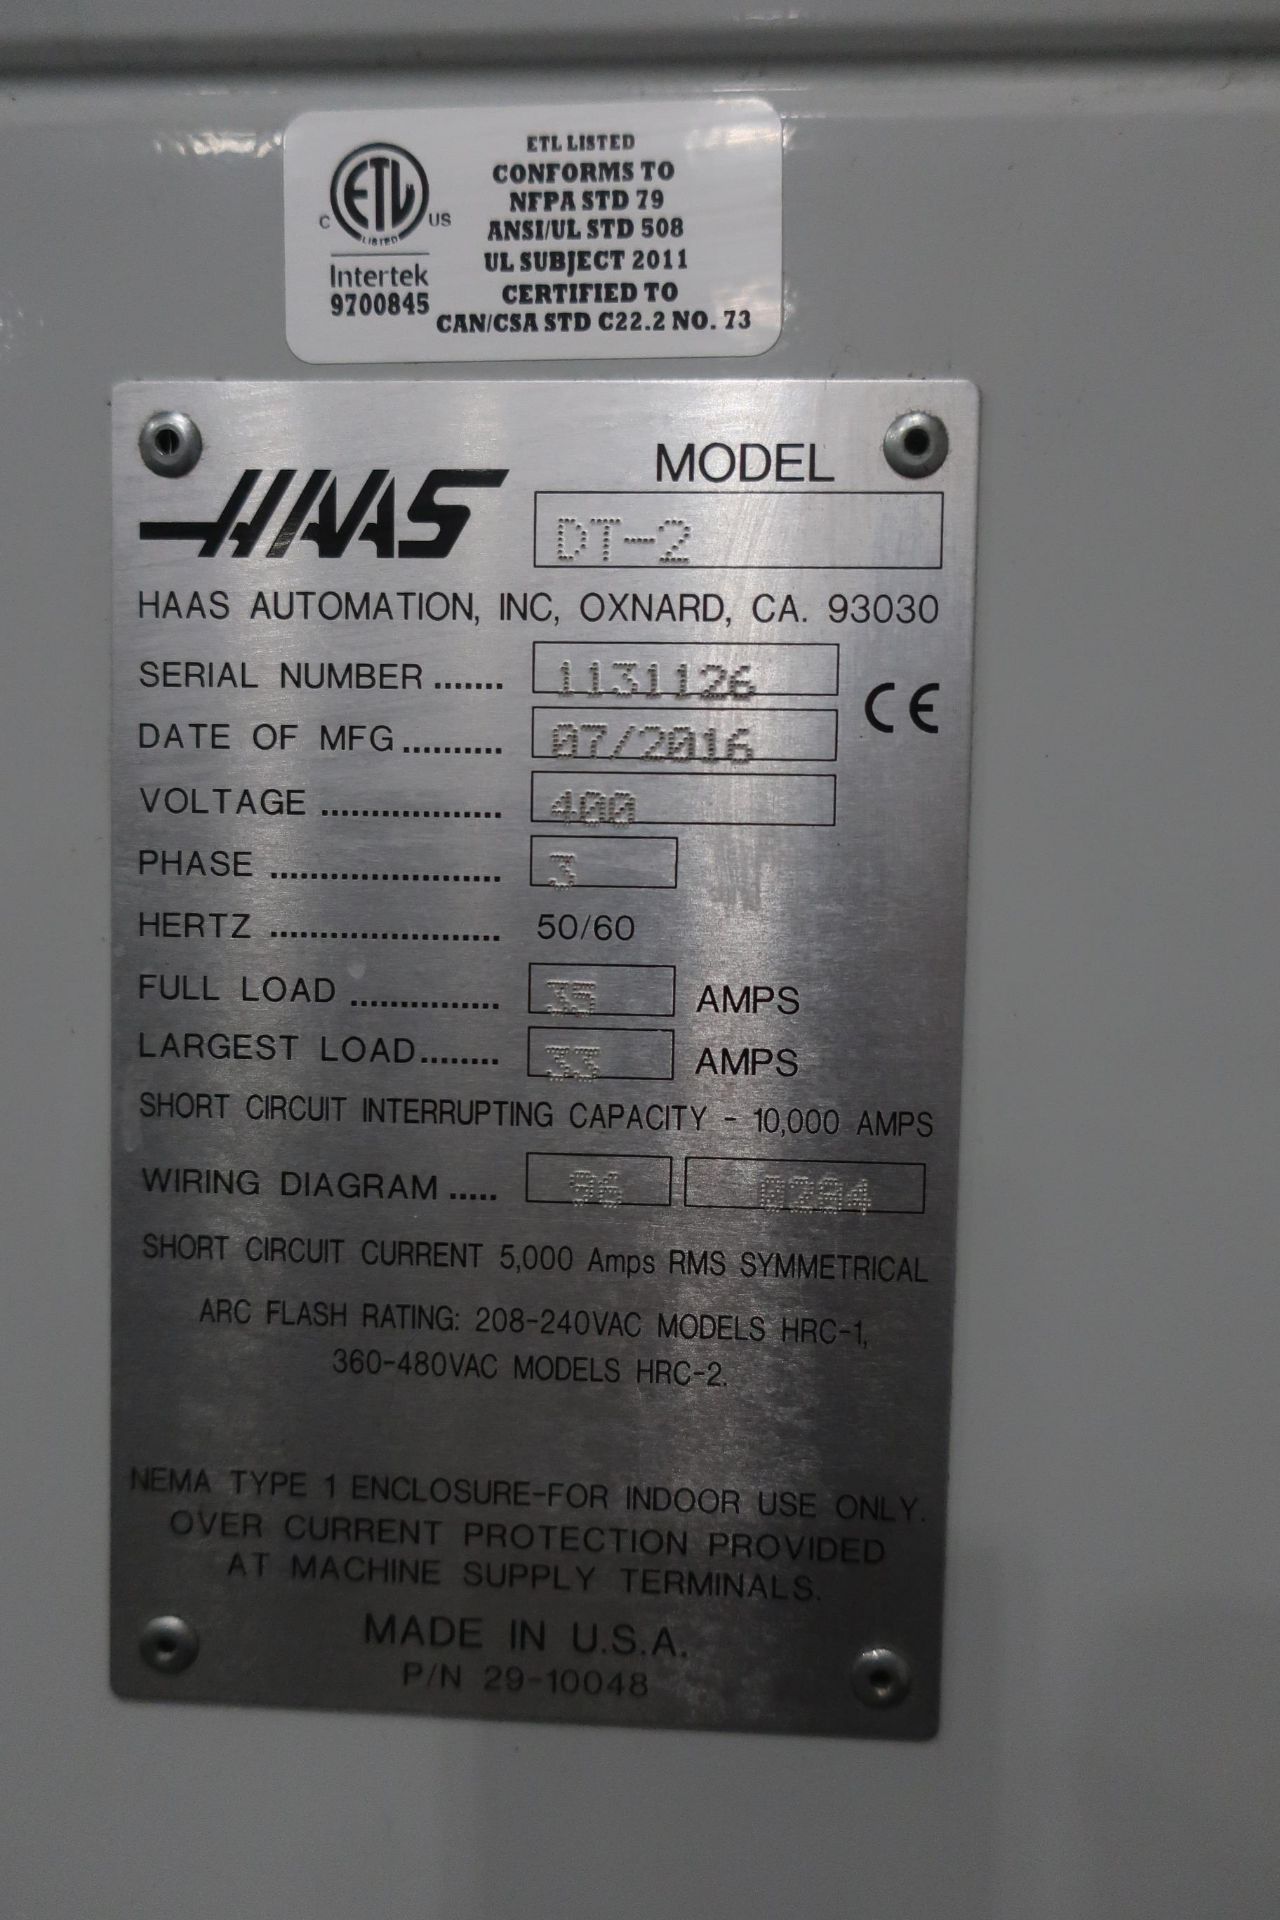 HAAS DT-2 4-AXIS CNC DRILL/TAP MILL VERTICAL MACHINING CENTER, S/N 1131126, NEW 2016 - Image 9 of 11